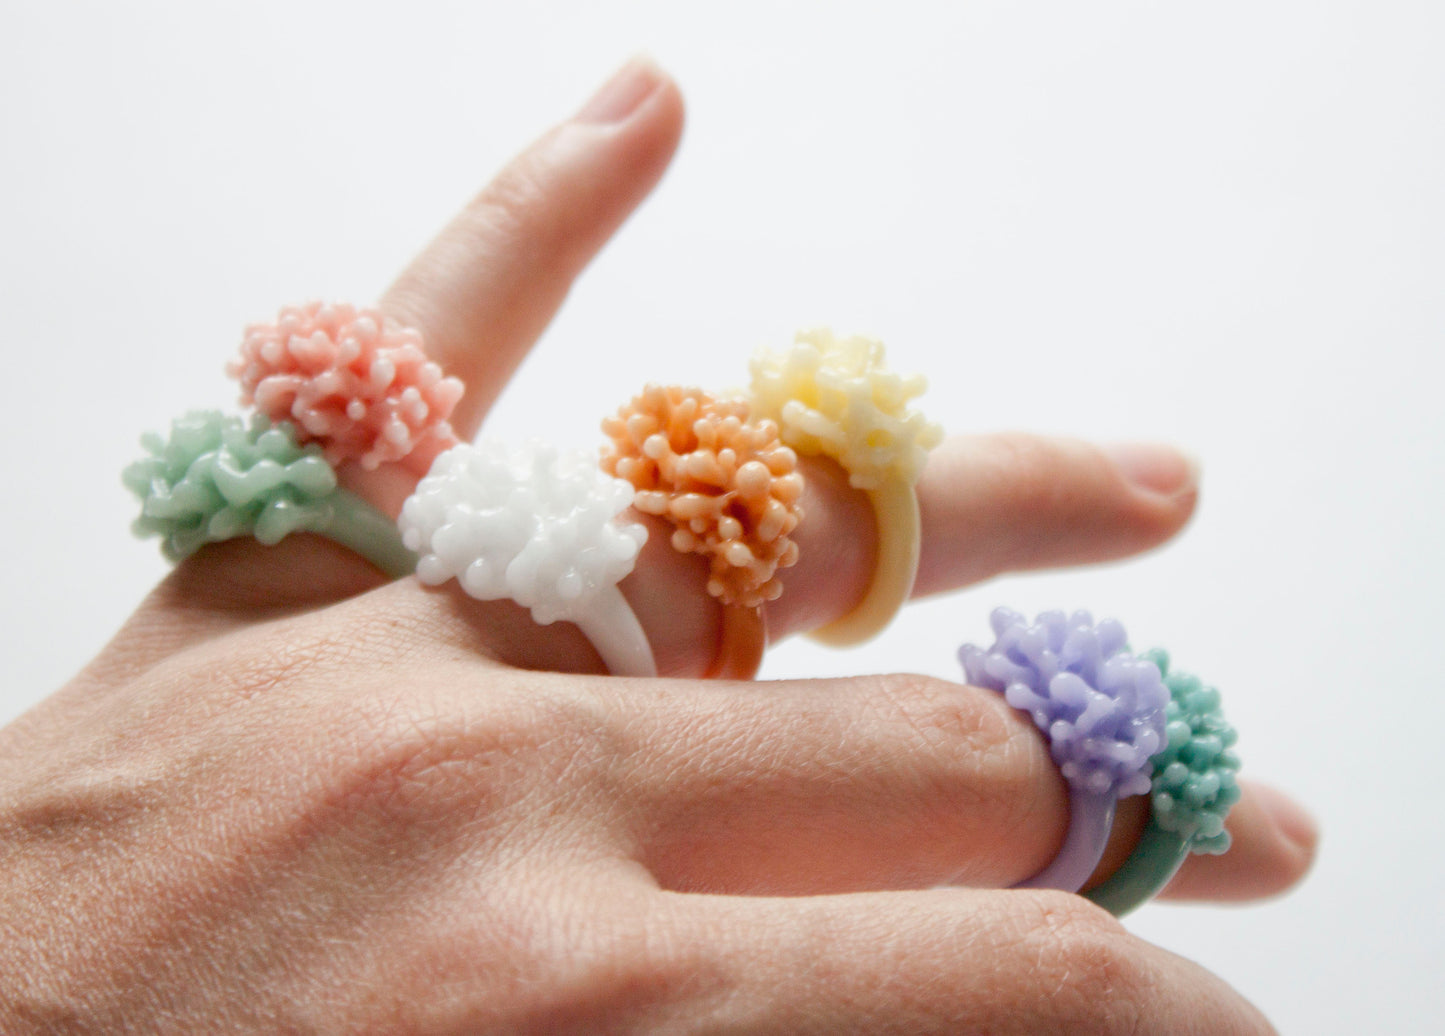 Glass Cluster Ring - Opaque Pastels